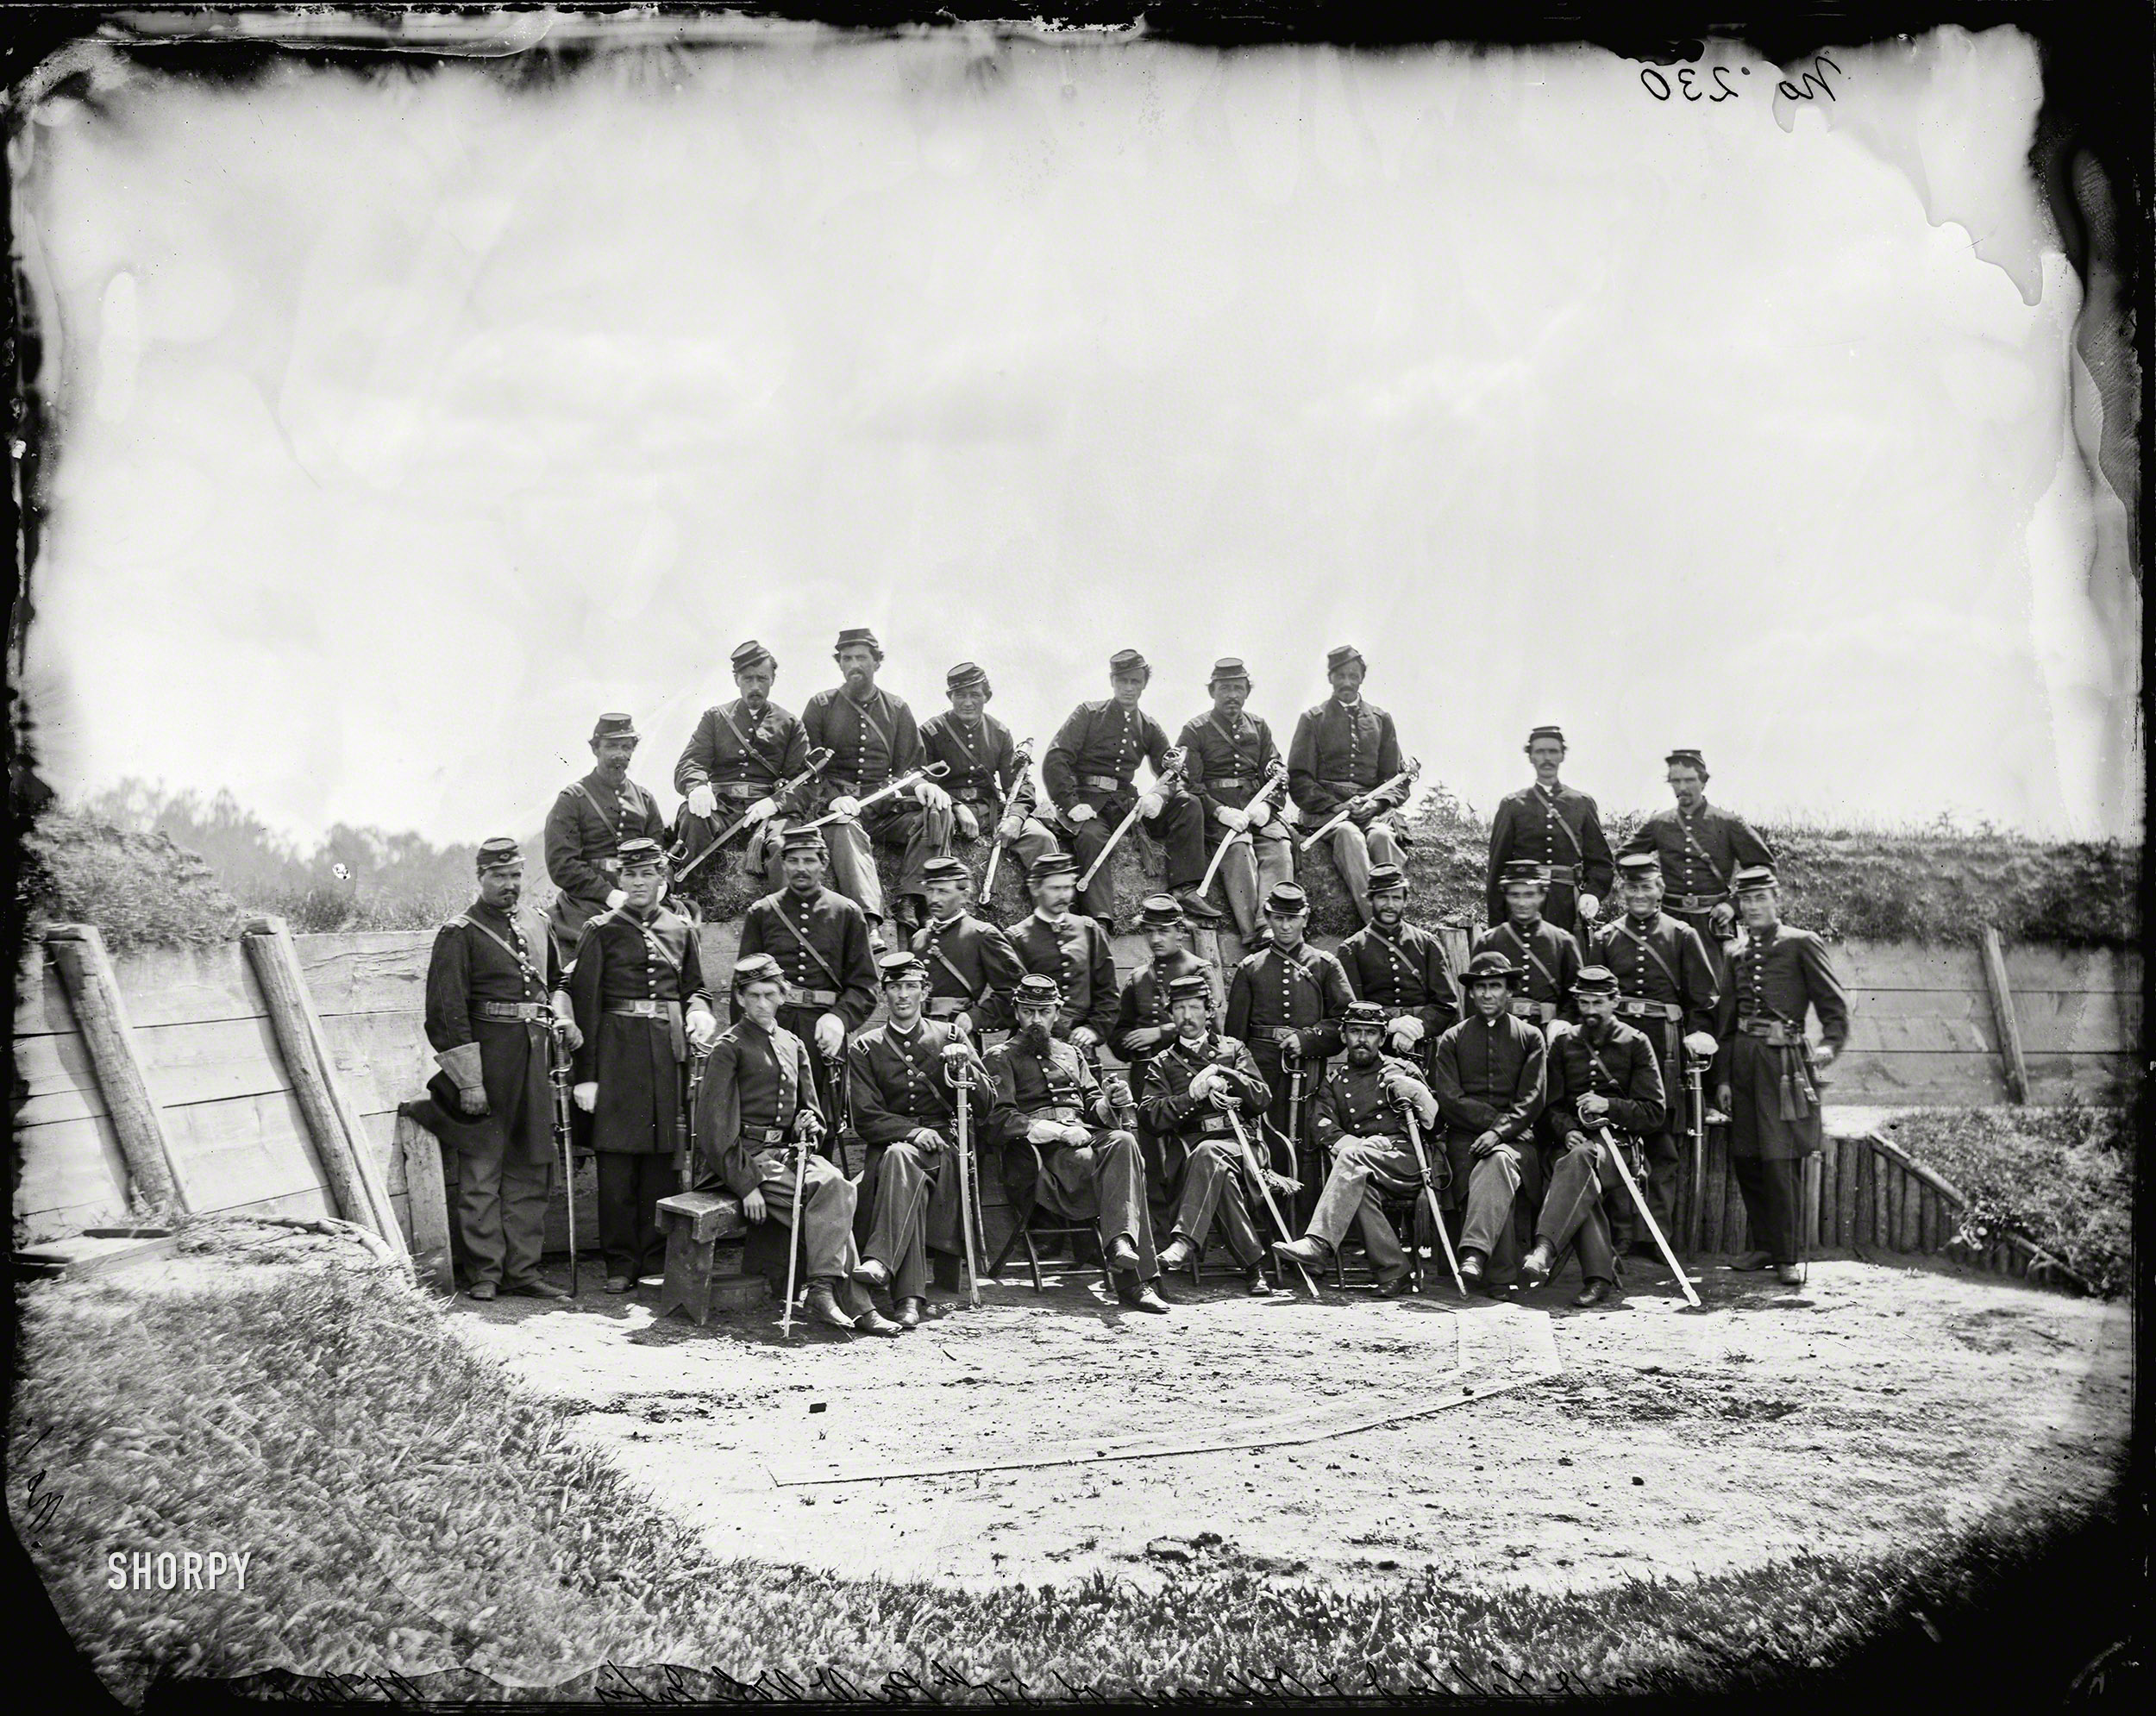 July 1865. "Col. William Telford and officers of the 50th Pennsylvania Infantry at Gettysburg." Wet plate negative by William Morris Smith. View full size.